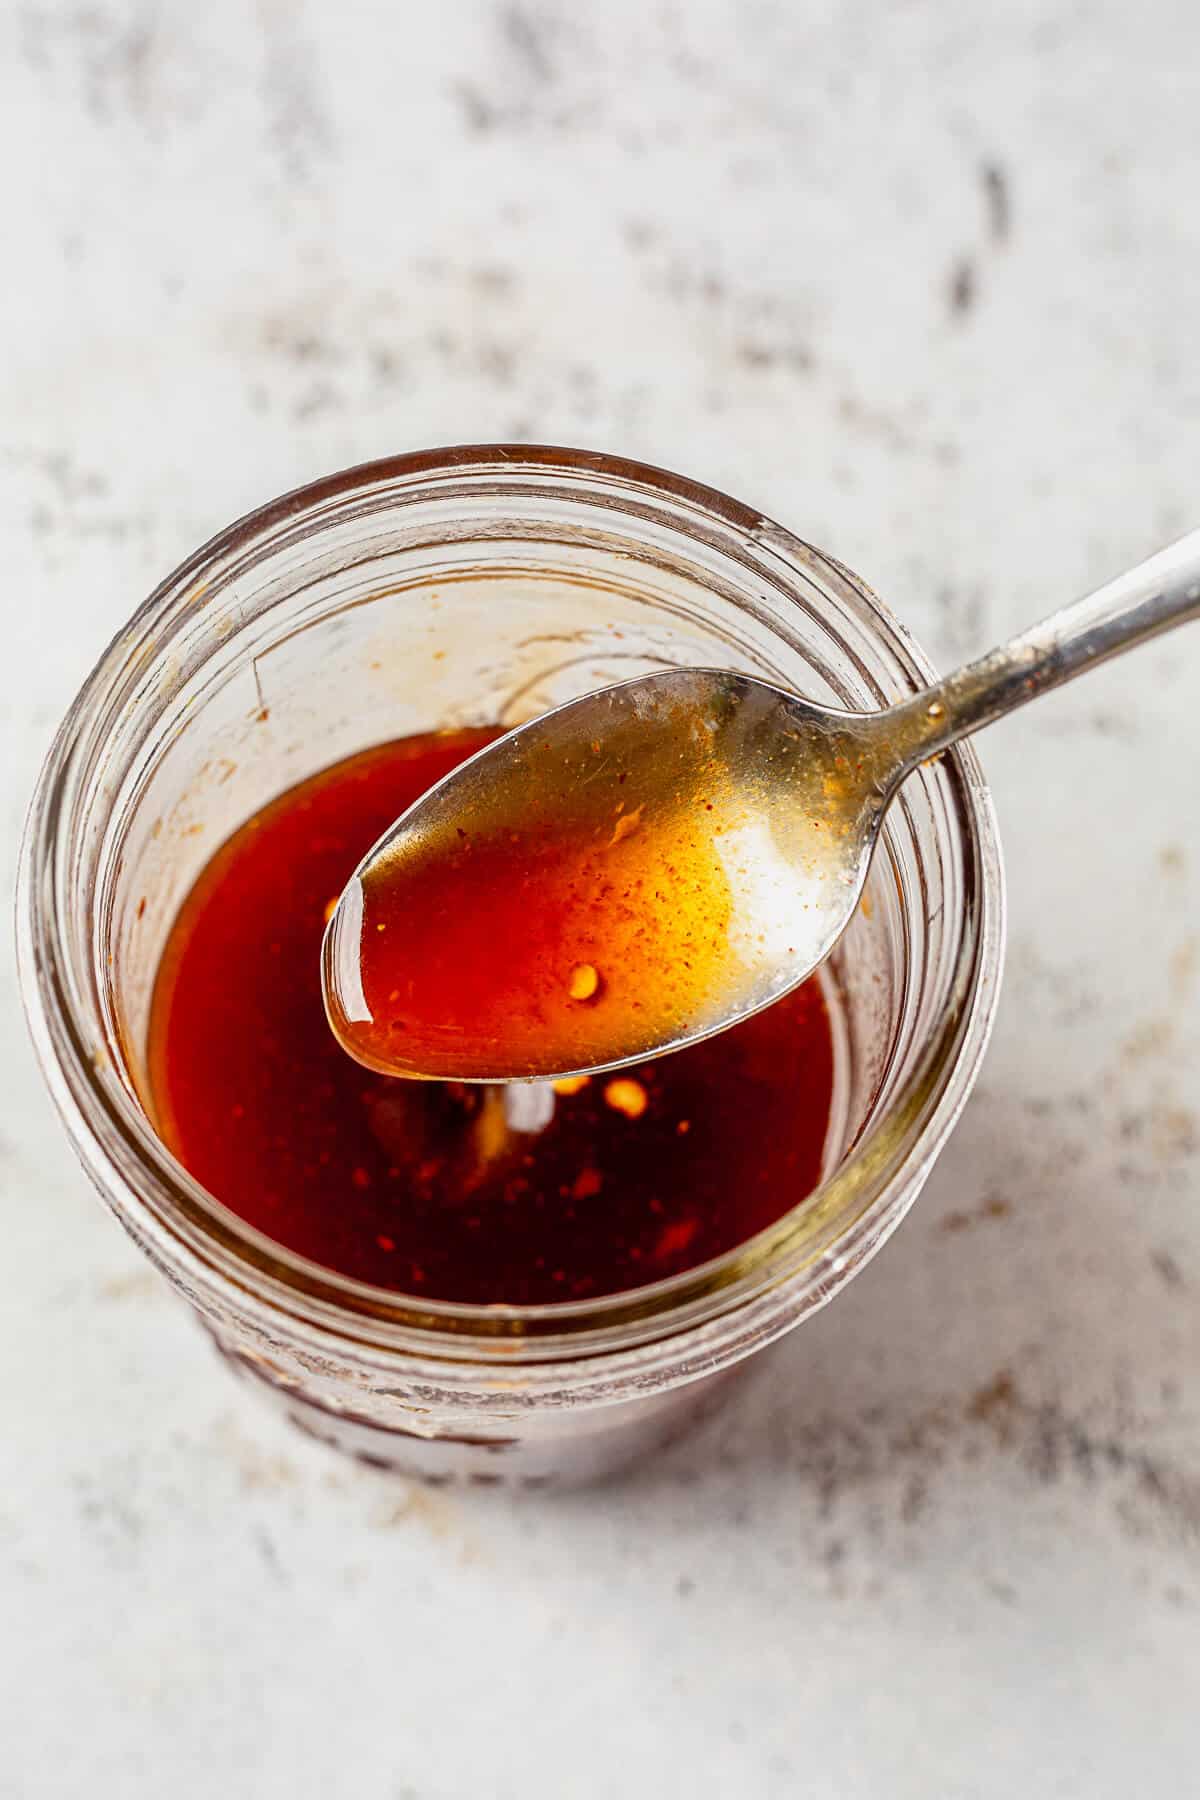 a spoonful of firecracker sauce coming out of a jar